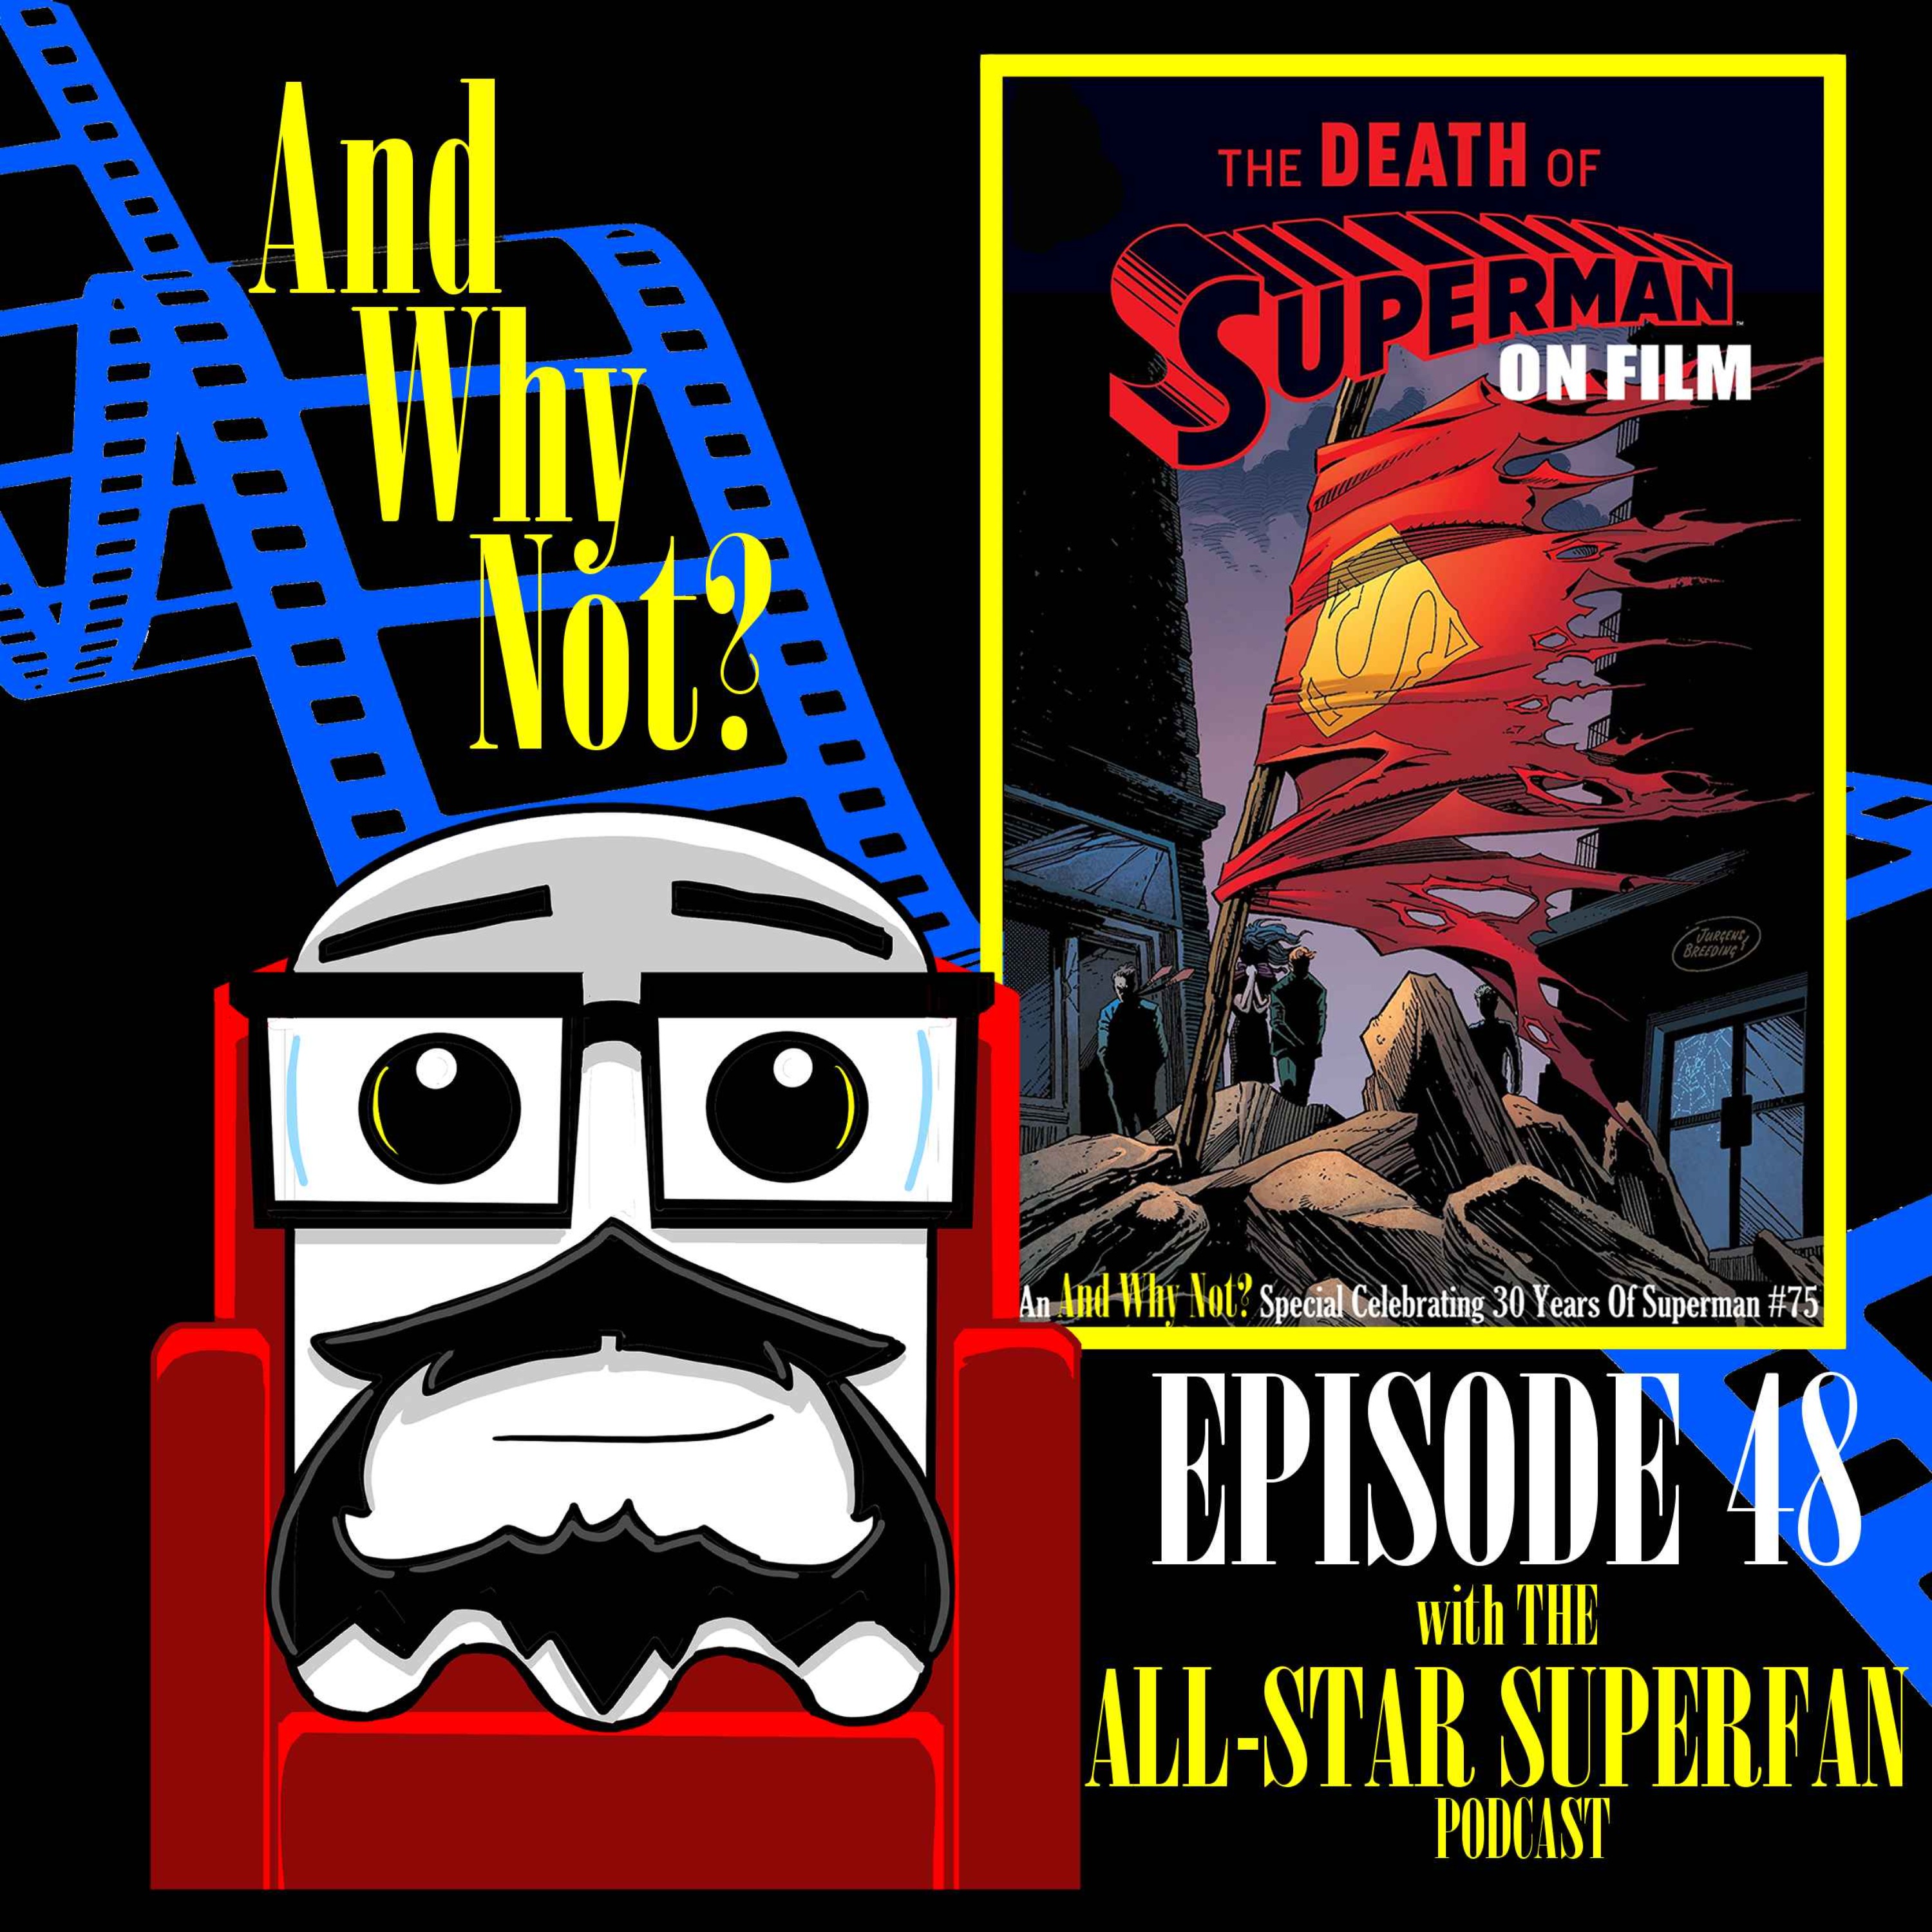 All Star Superfan Podcast  a podcast by Rob O'Connor, Alan Burke